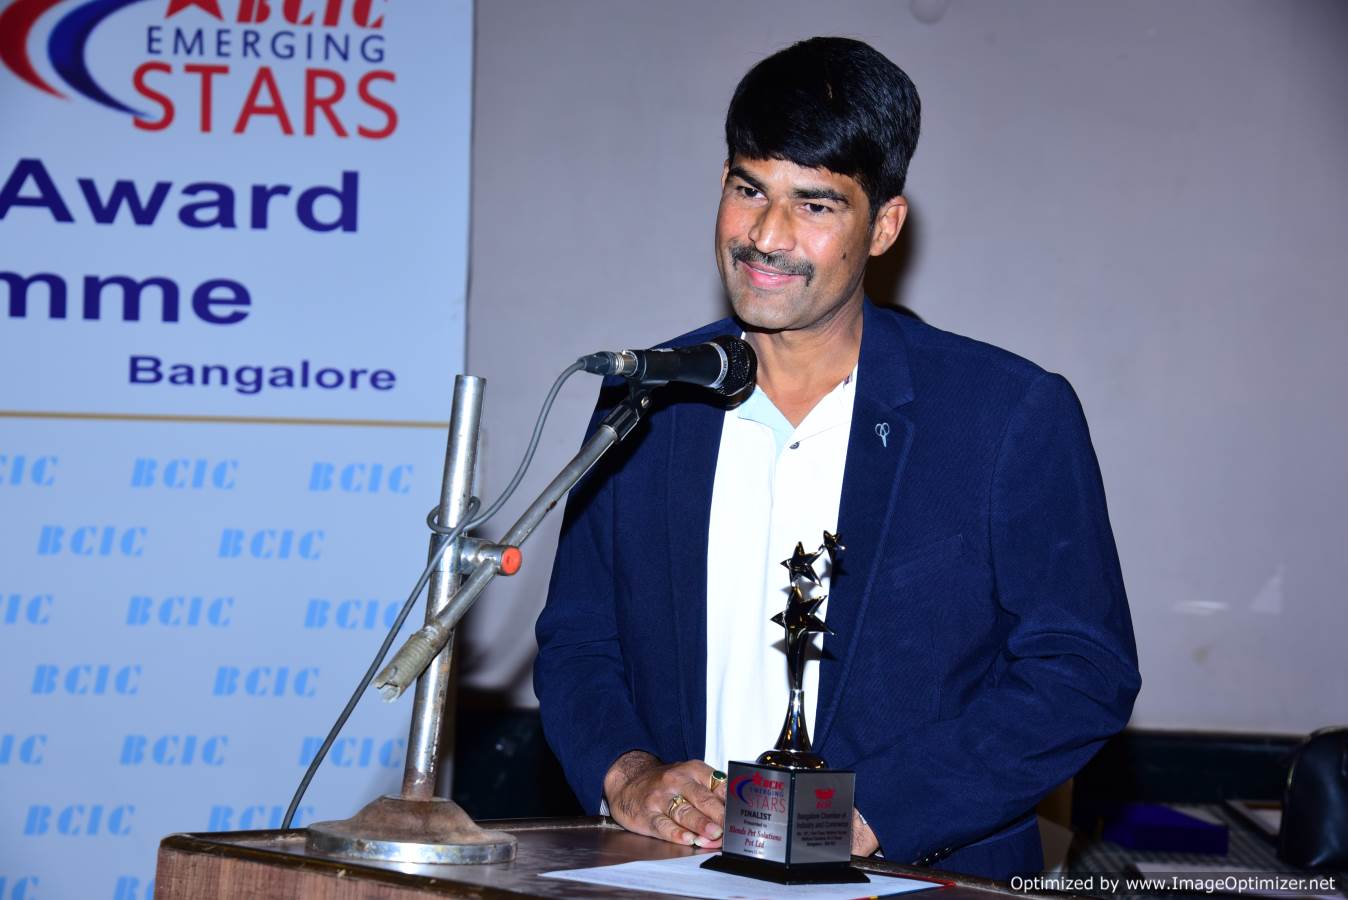 Bcic-awards-gallery-image-28